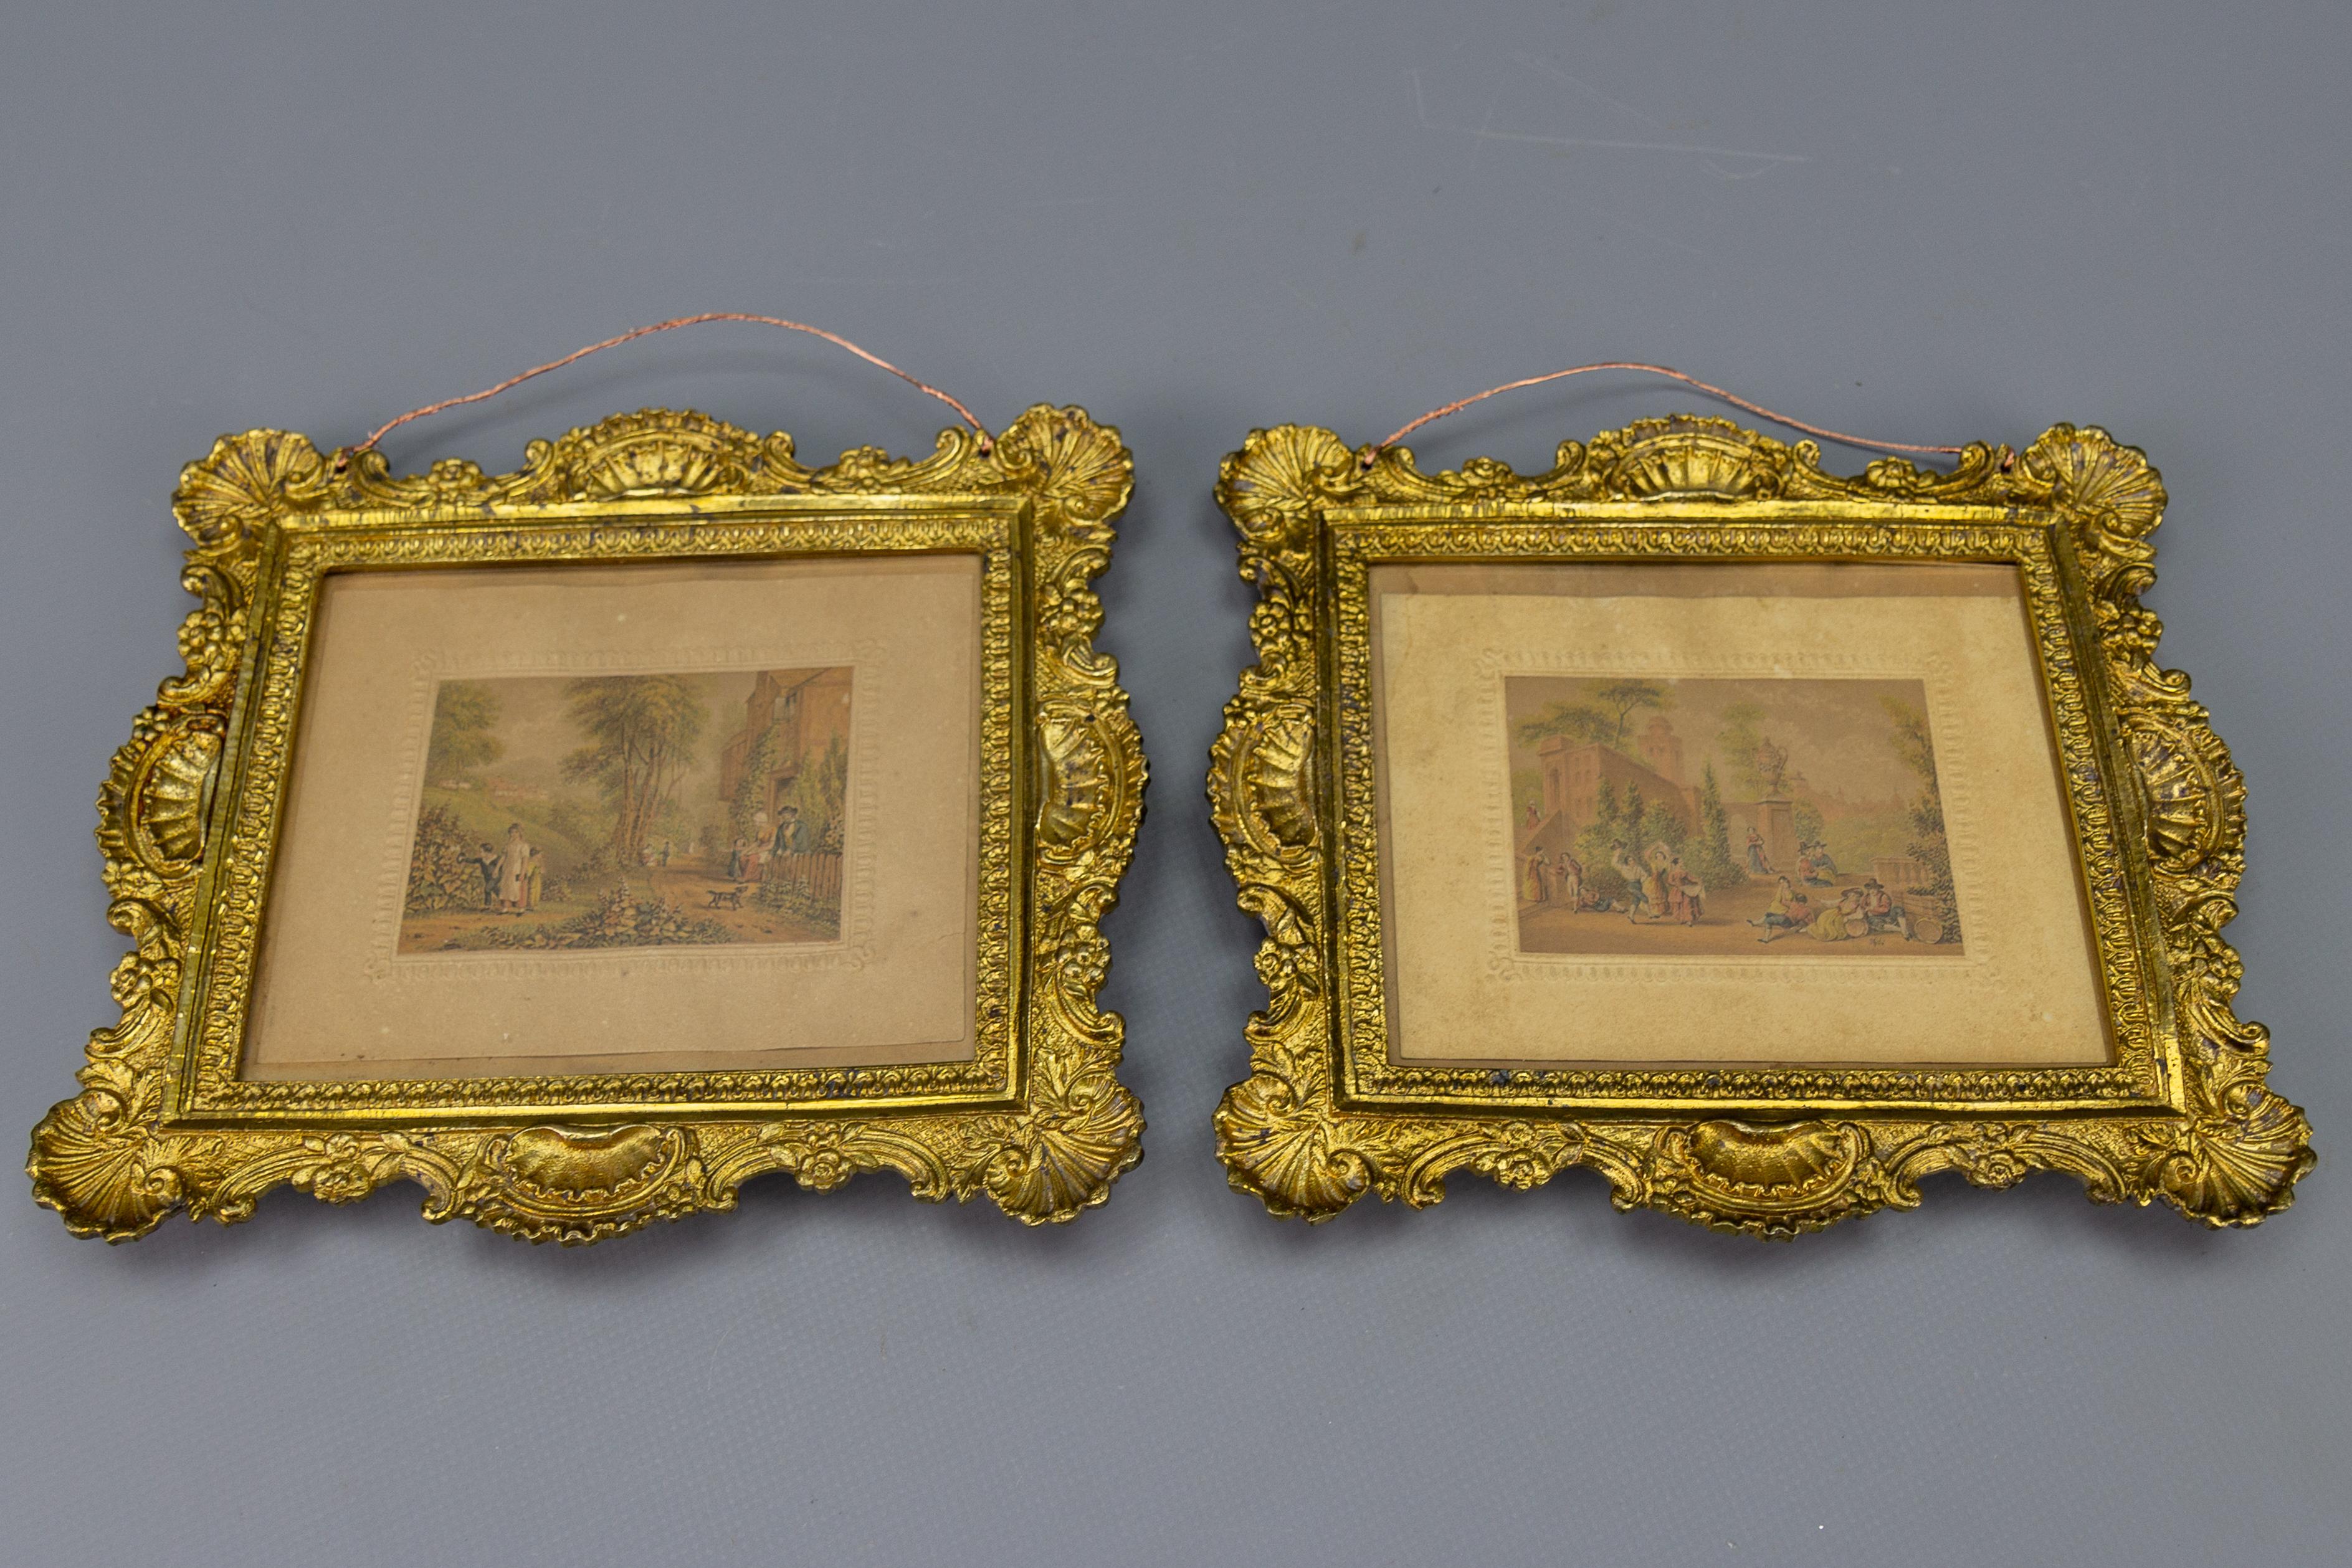 Pair of Antique French gilt bronze Rococo style picture frames, ca. 1890
This adorable pair of delicate gilt bronze picture frames features typical Rococo-style motifs - rocailles, flowers, and scrolls, with glass on the front and a brass plate on